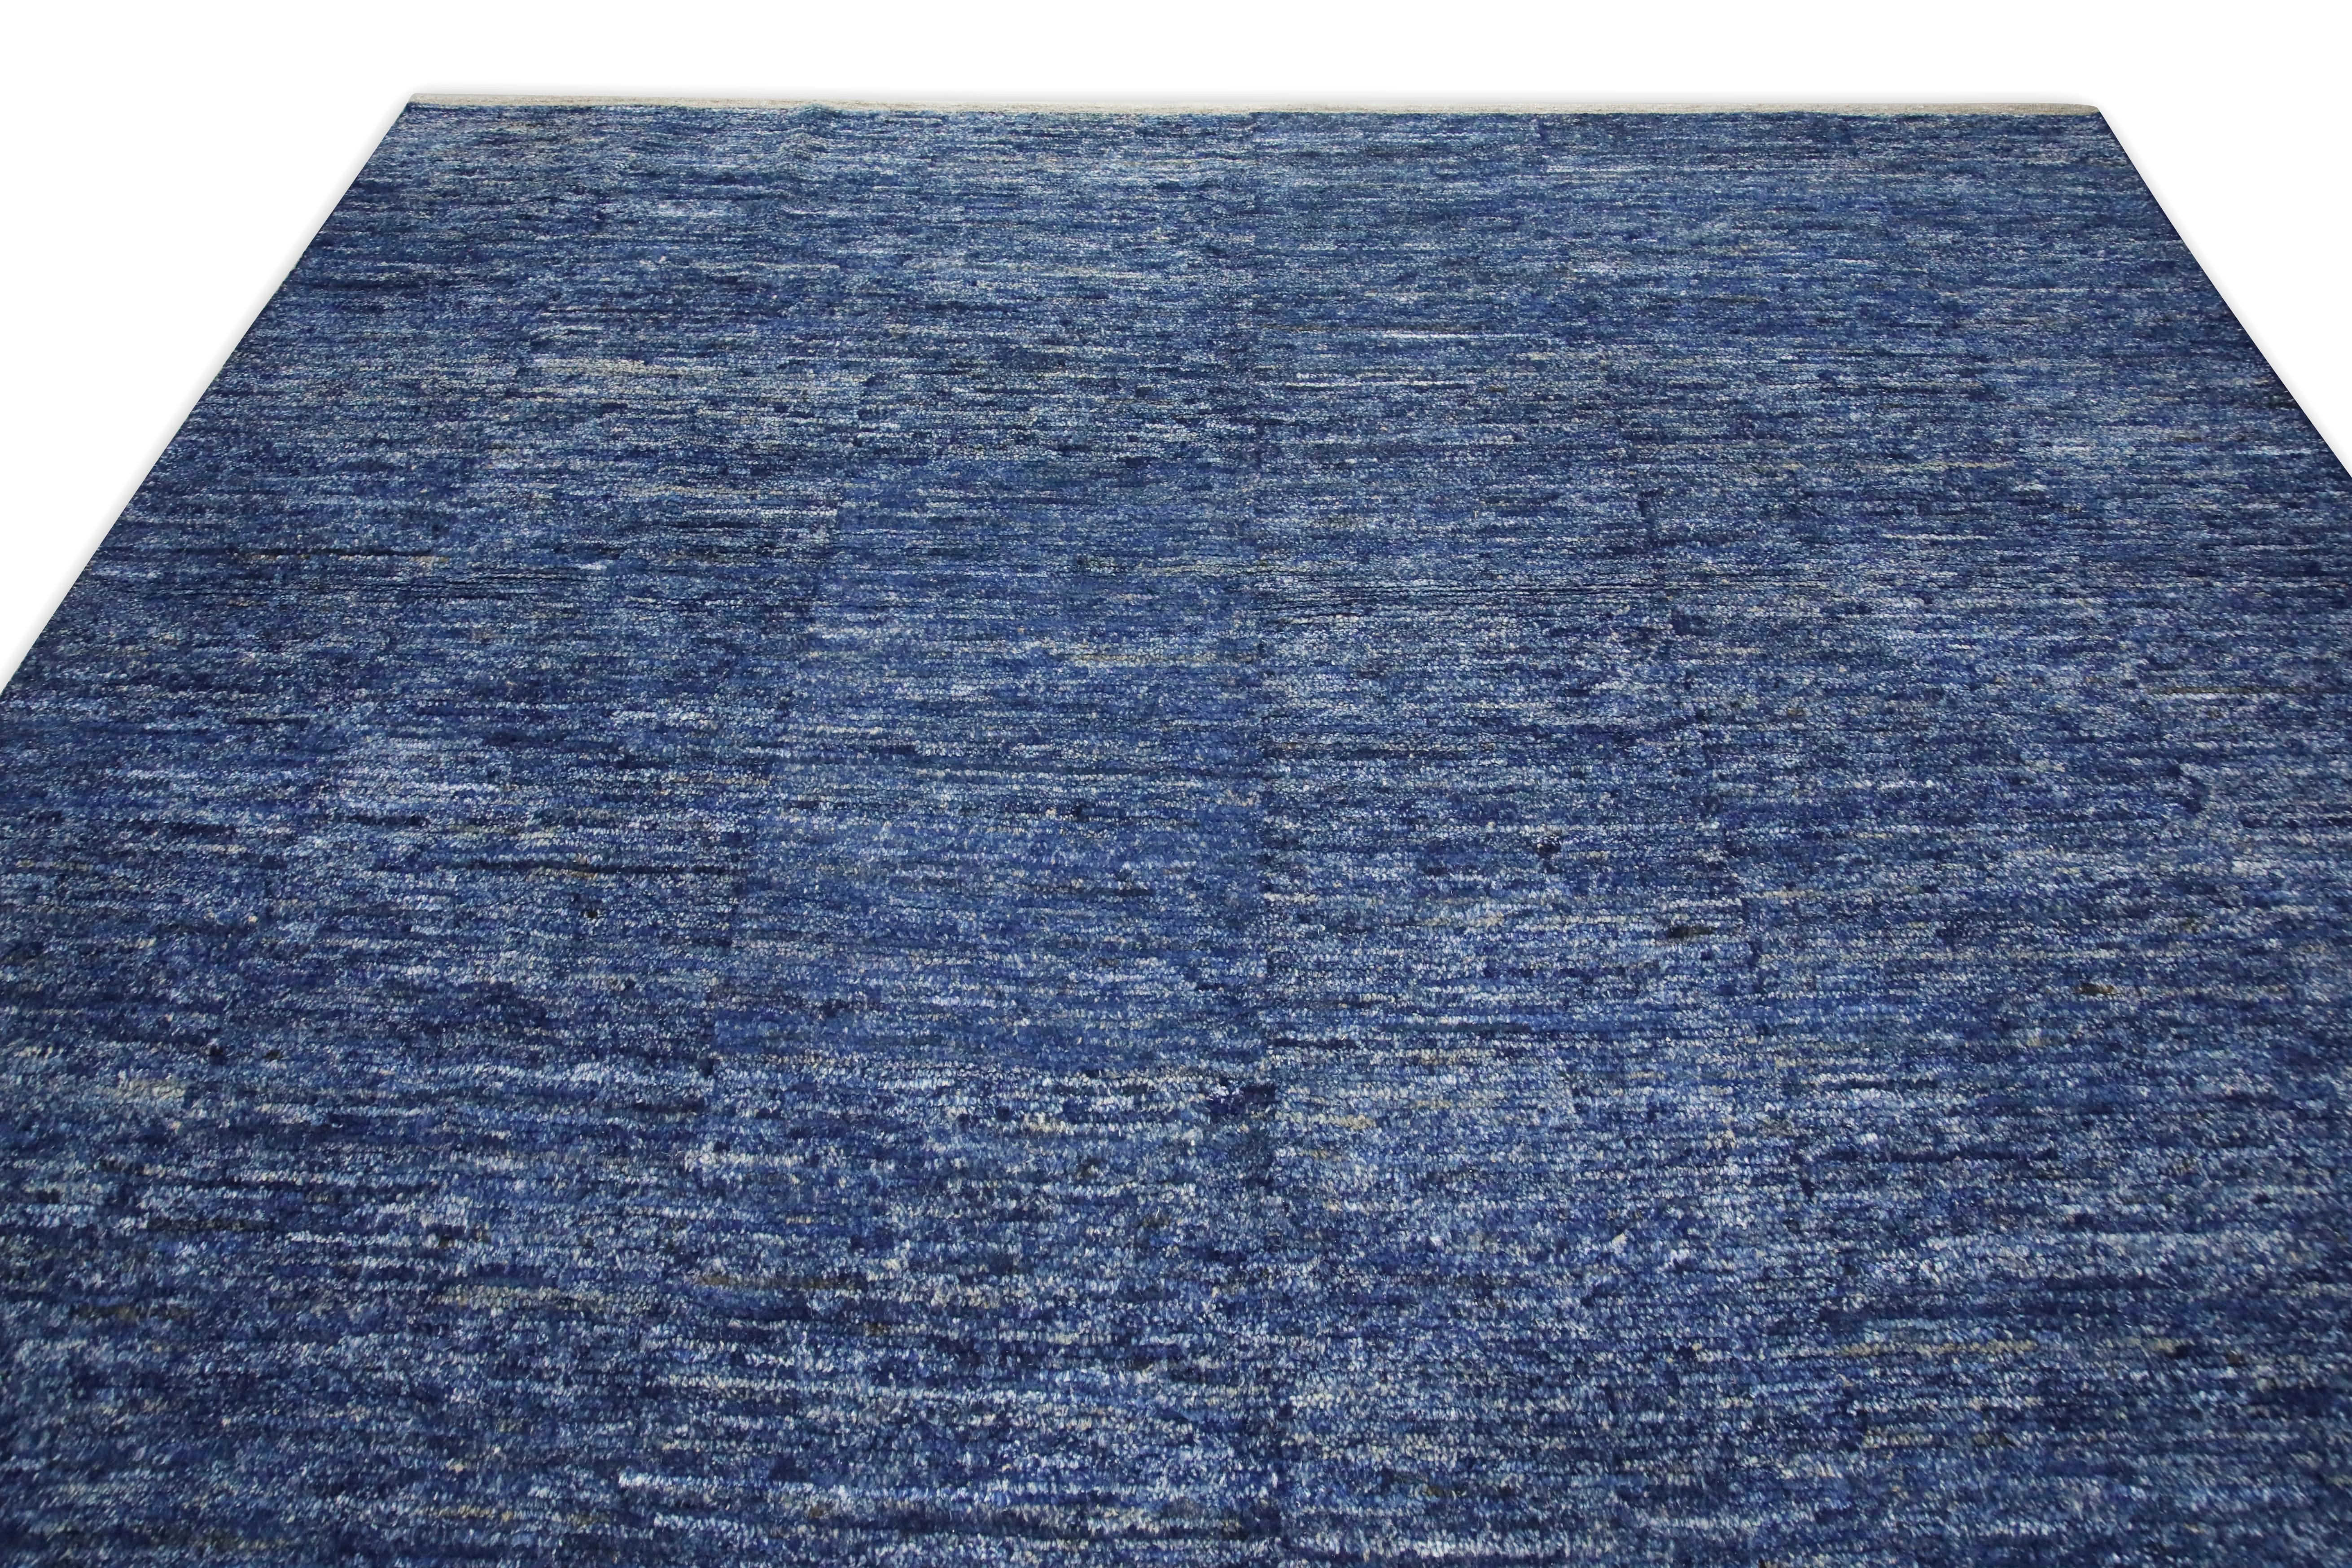 Vegetable Dyed 21st Century Modern Moroccan Style Wool Rug in Blue Design 9'5